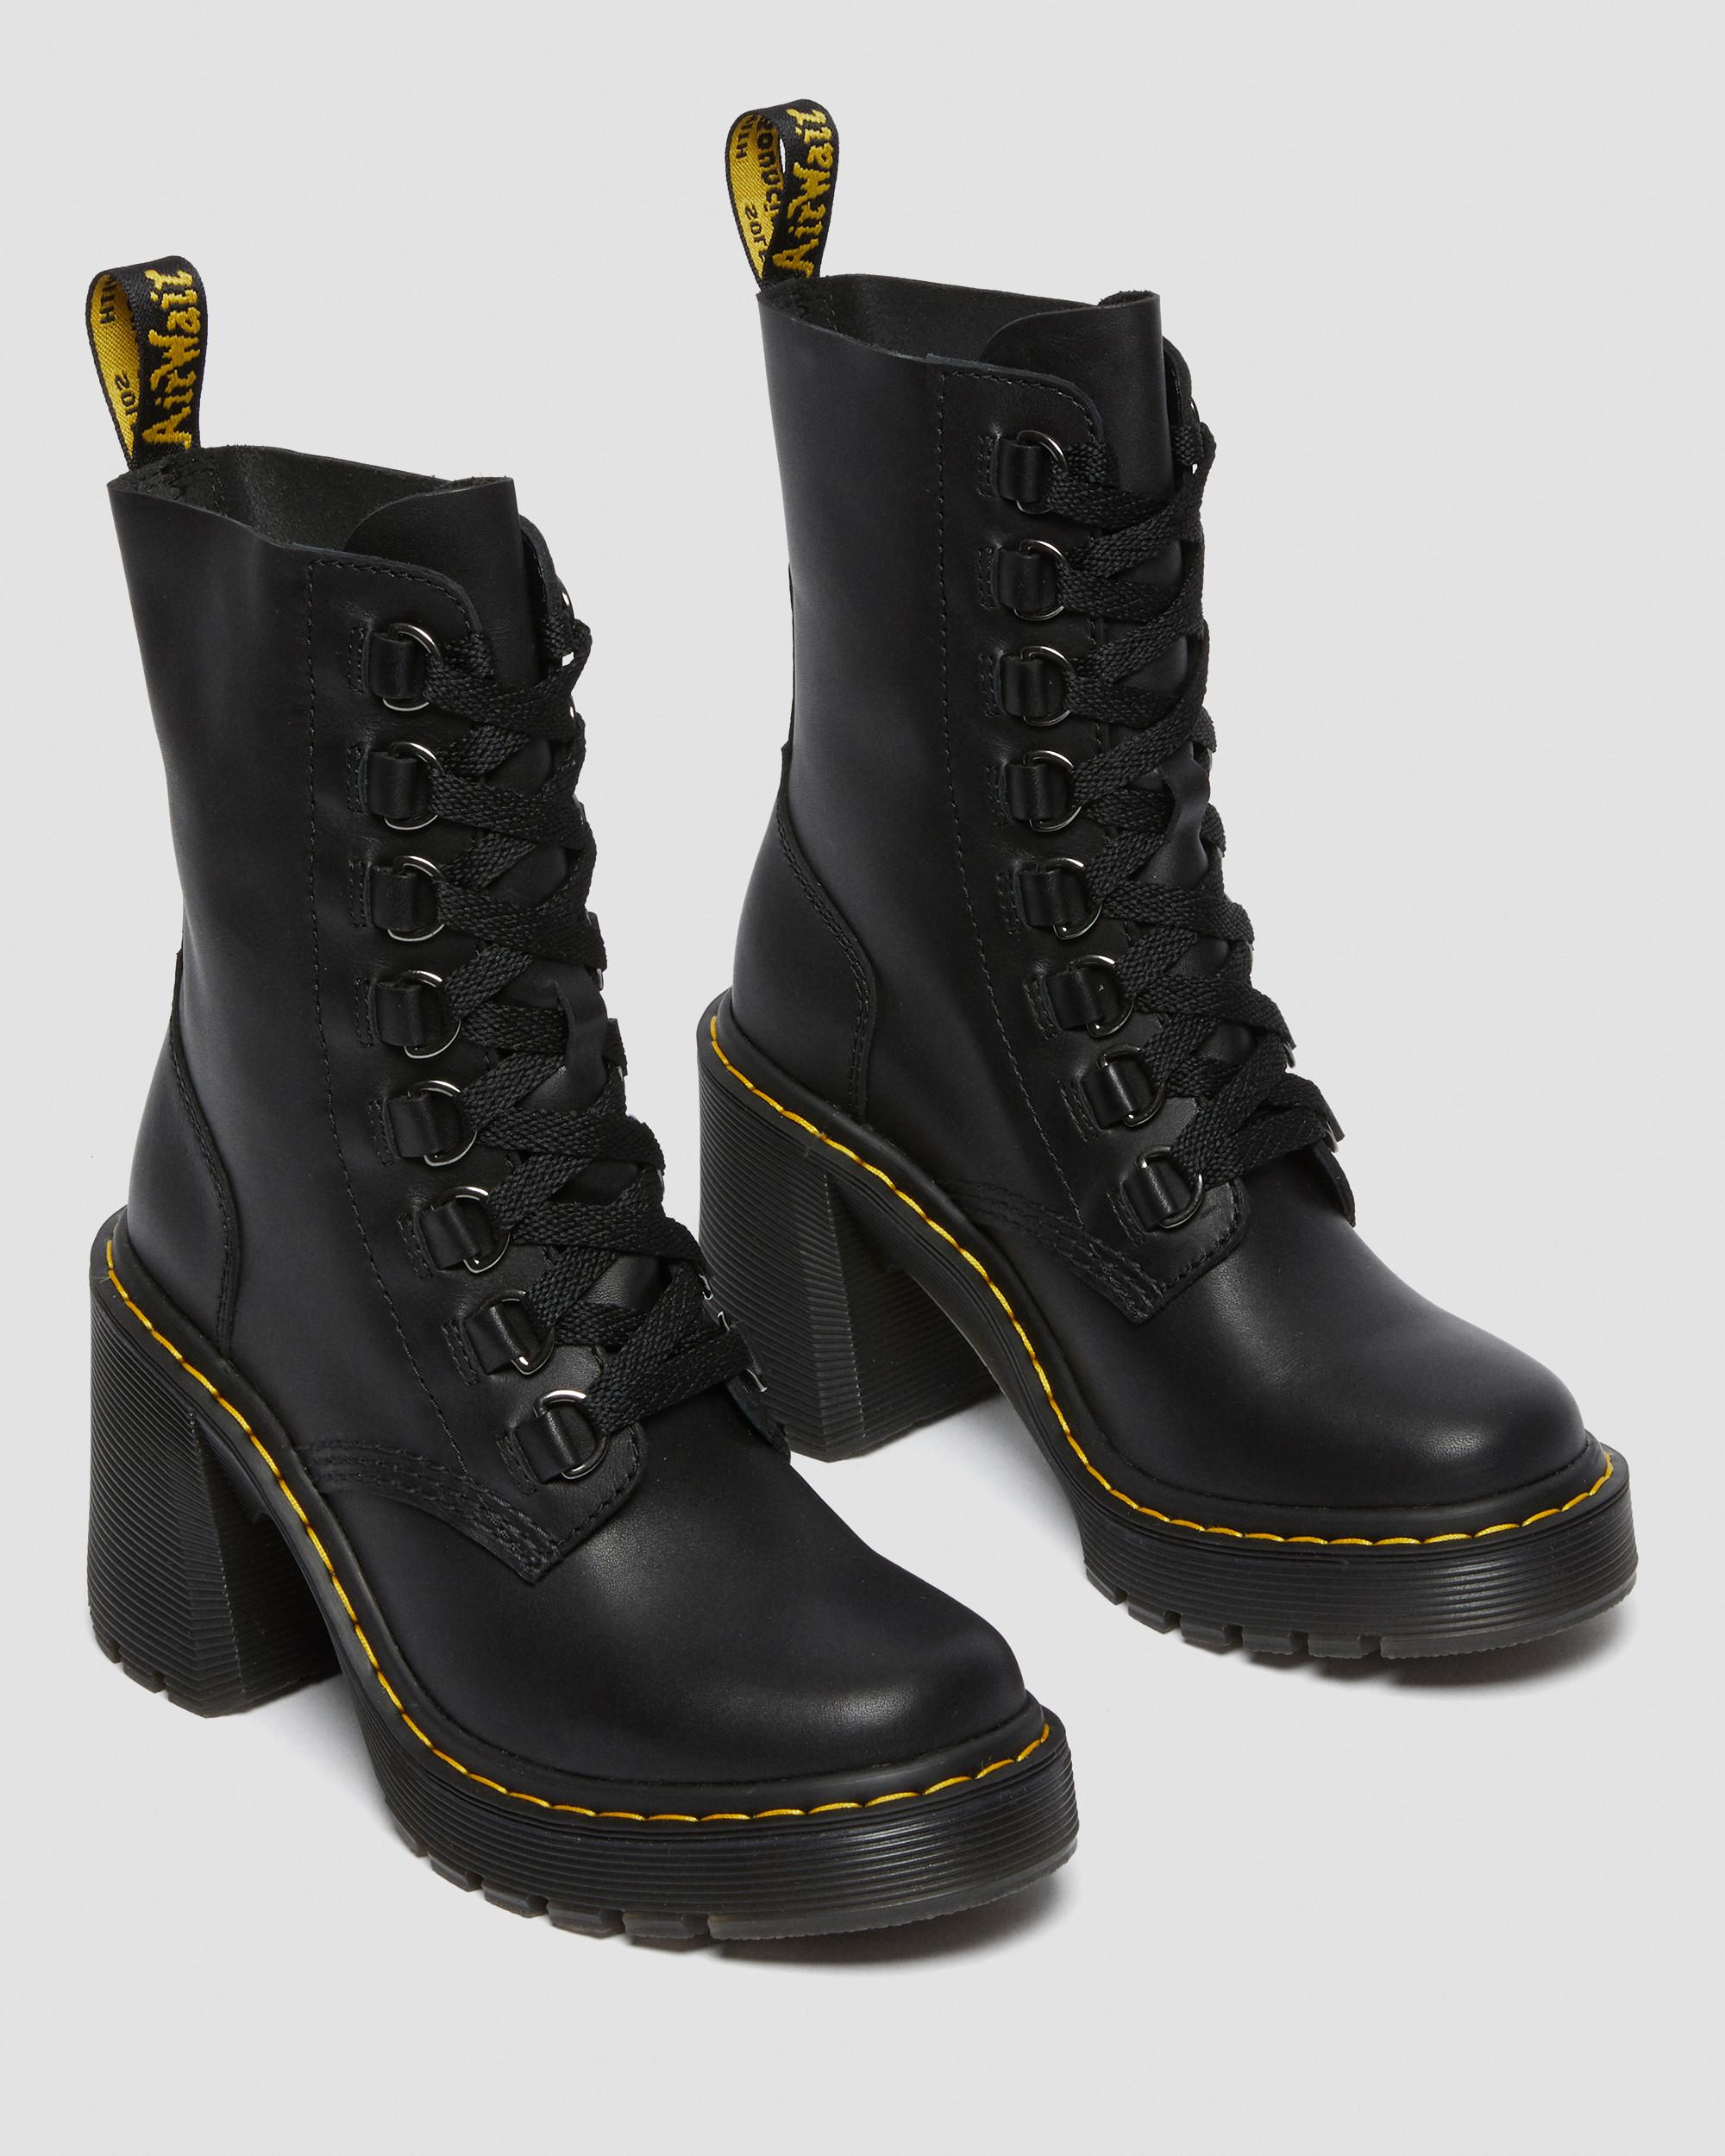 Chesney Leather Flared Heel Lace Up Boots in Black